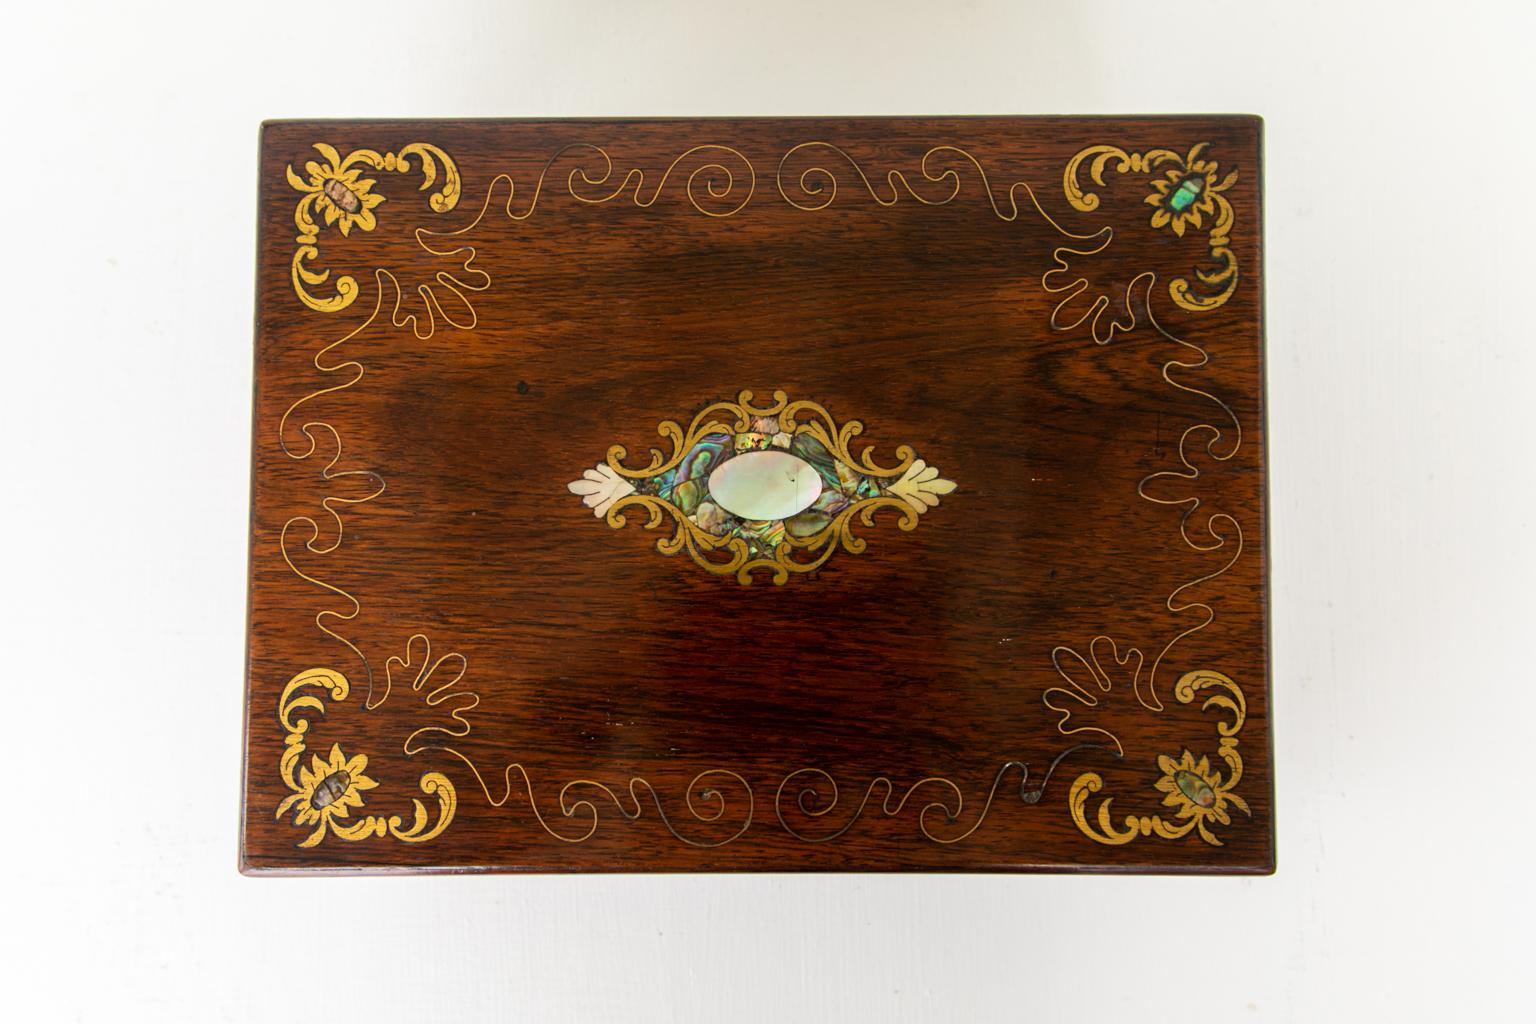 Rosewood inlaid jewelry box, inlaid with engraved brass panels and abalone shells and is framed with brass wire arabesques. The interior has a removable tray with multiple compartments, and is covered with cobalt blue fabric lined with silver foil.